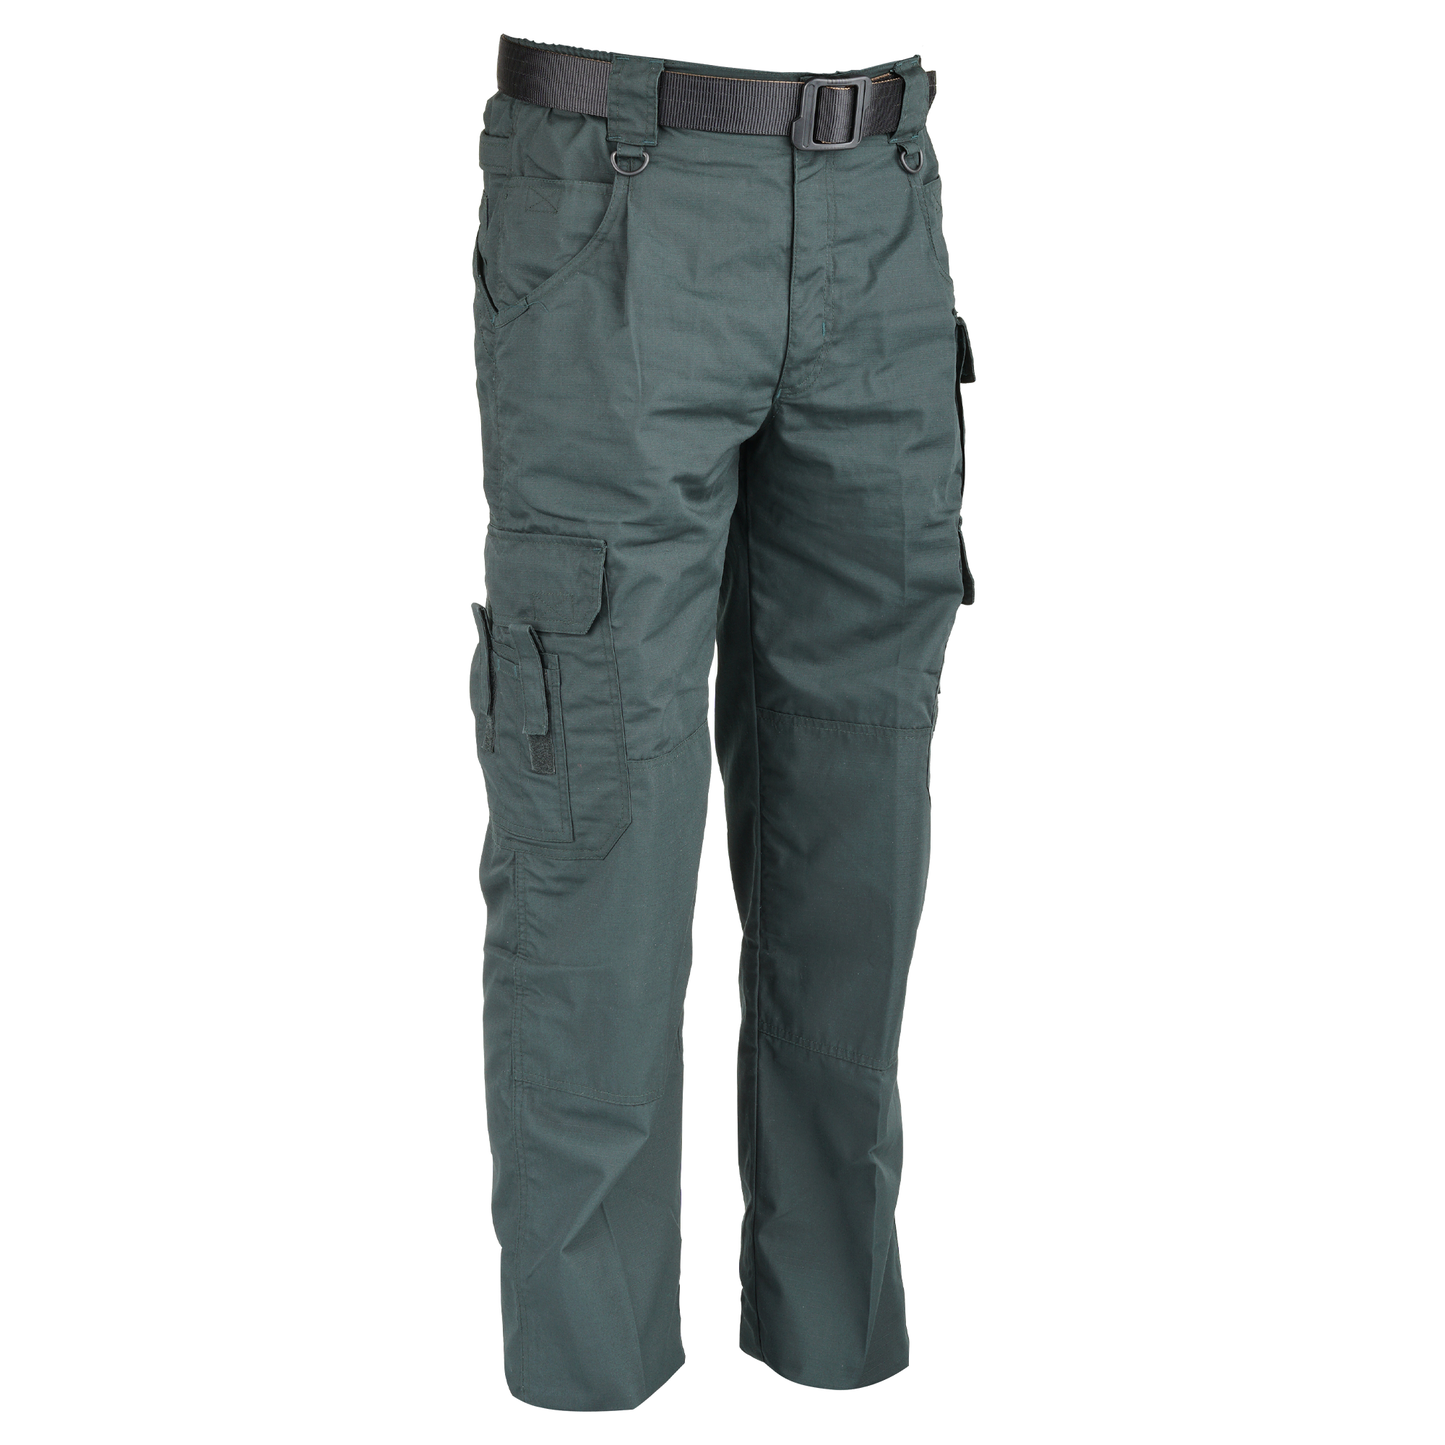 Niton Tactical RipStop EMS Trousers 32" Leg - Midnight Green